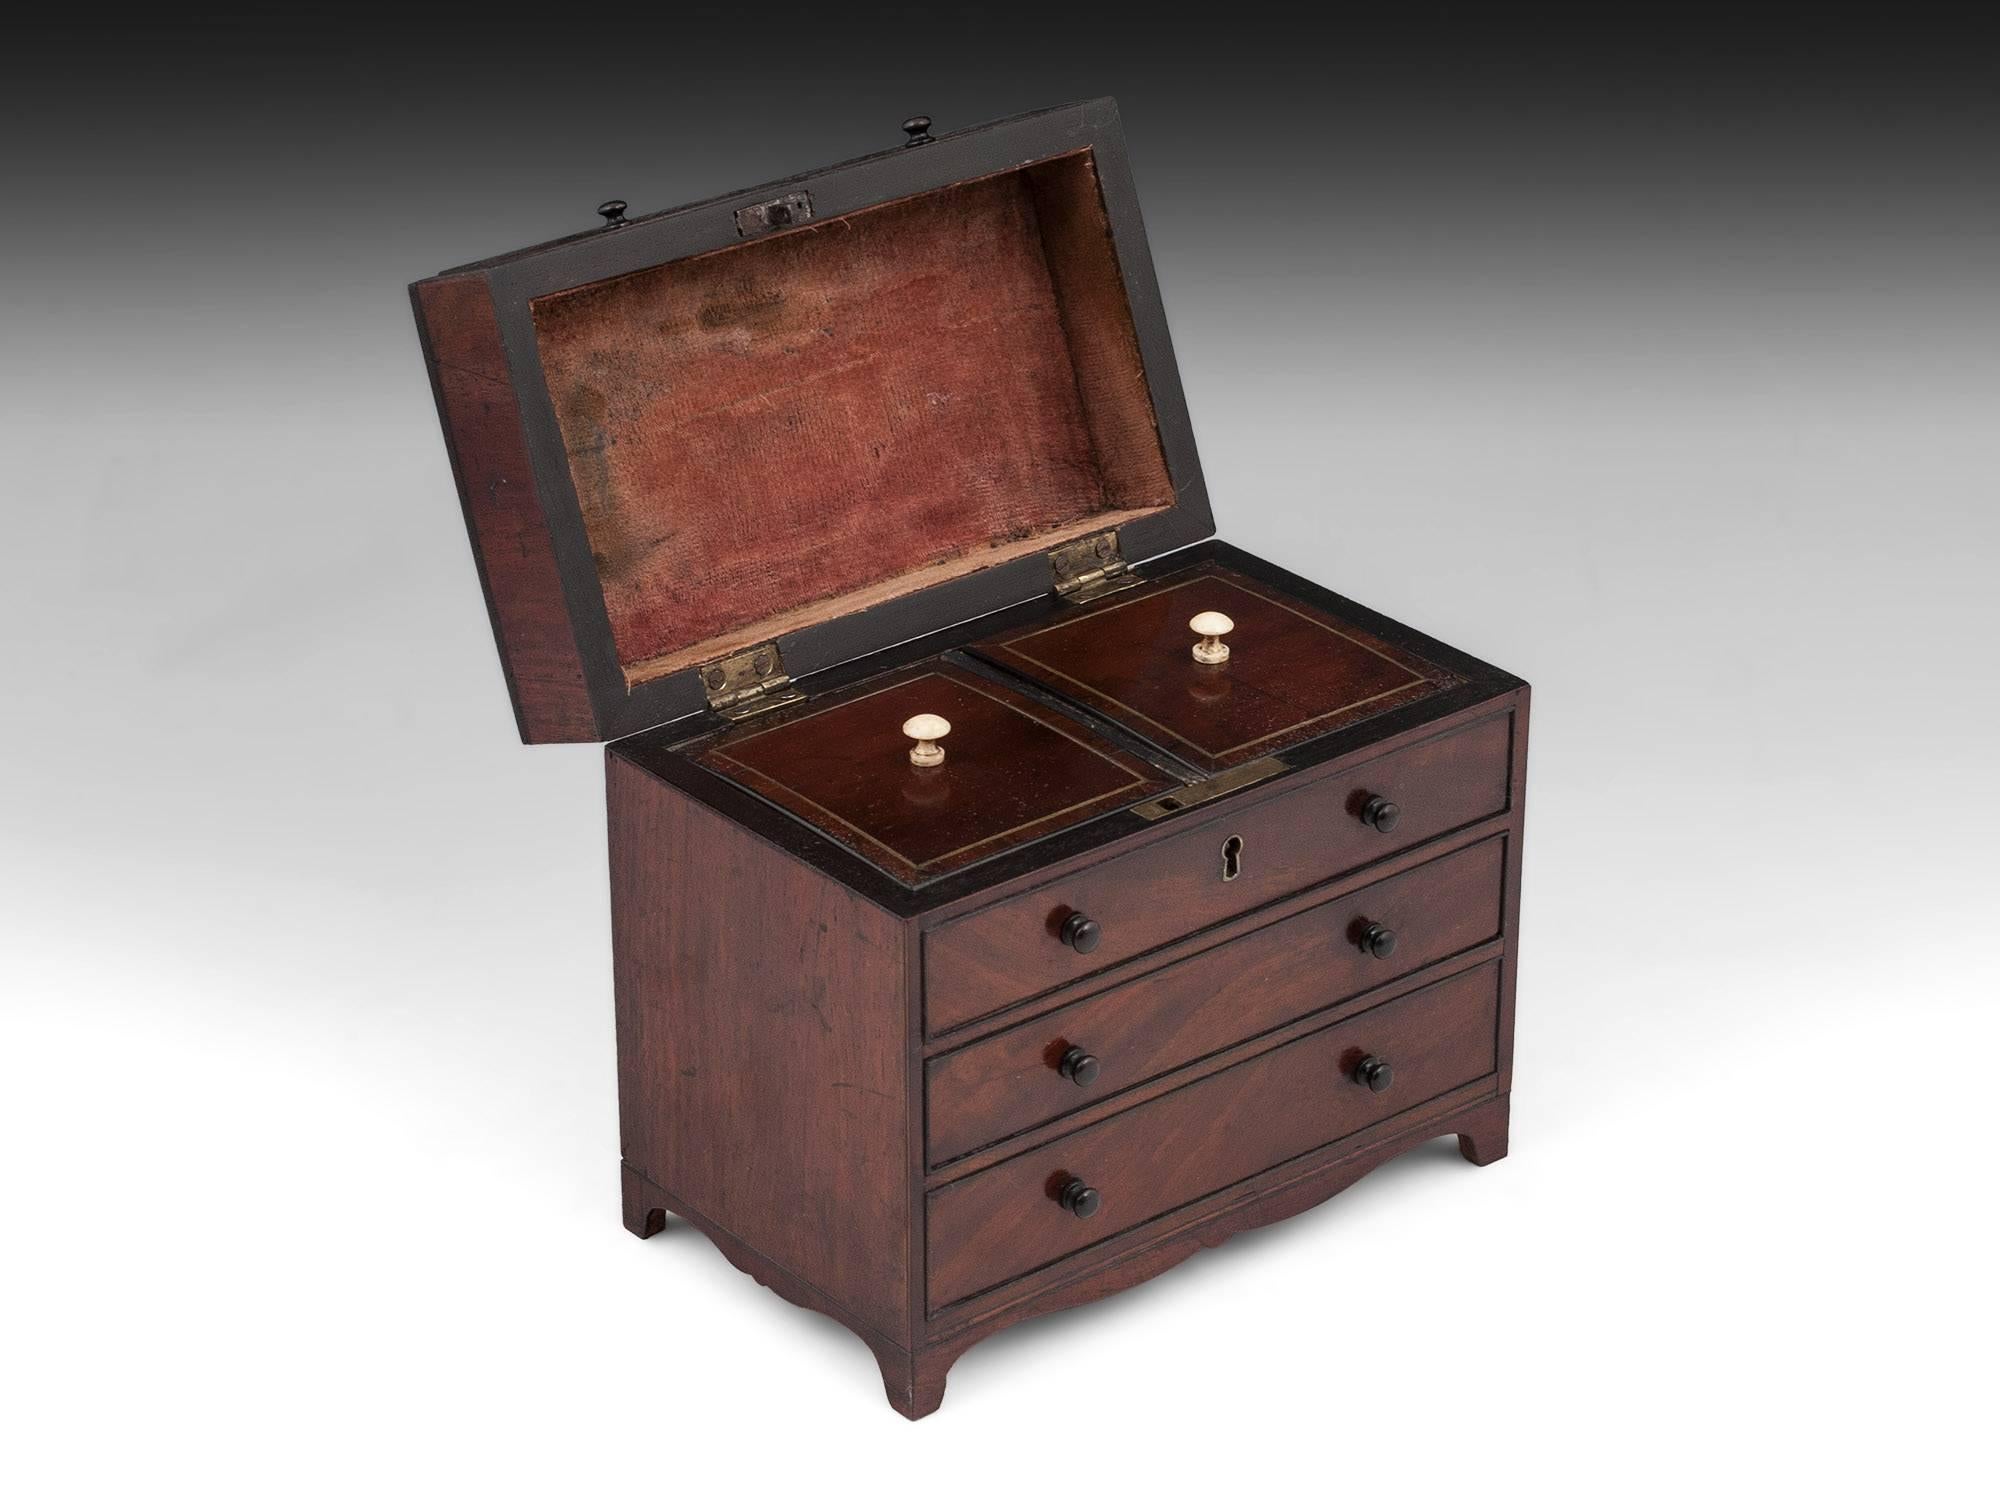 British Rare Mahogany Chest of Drawers Tea Caddy, 19th Century For Sale